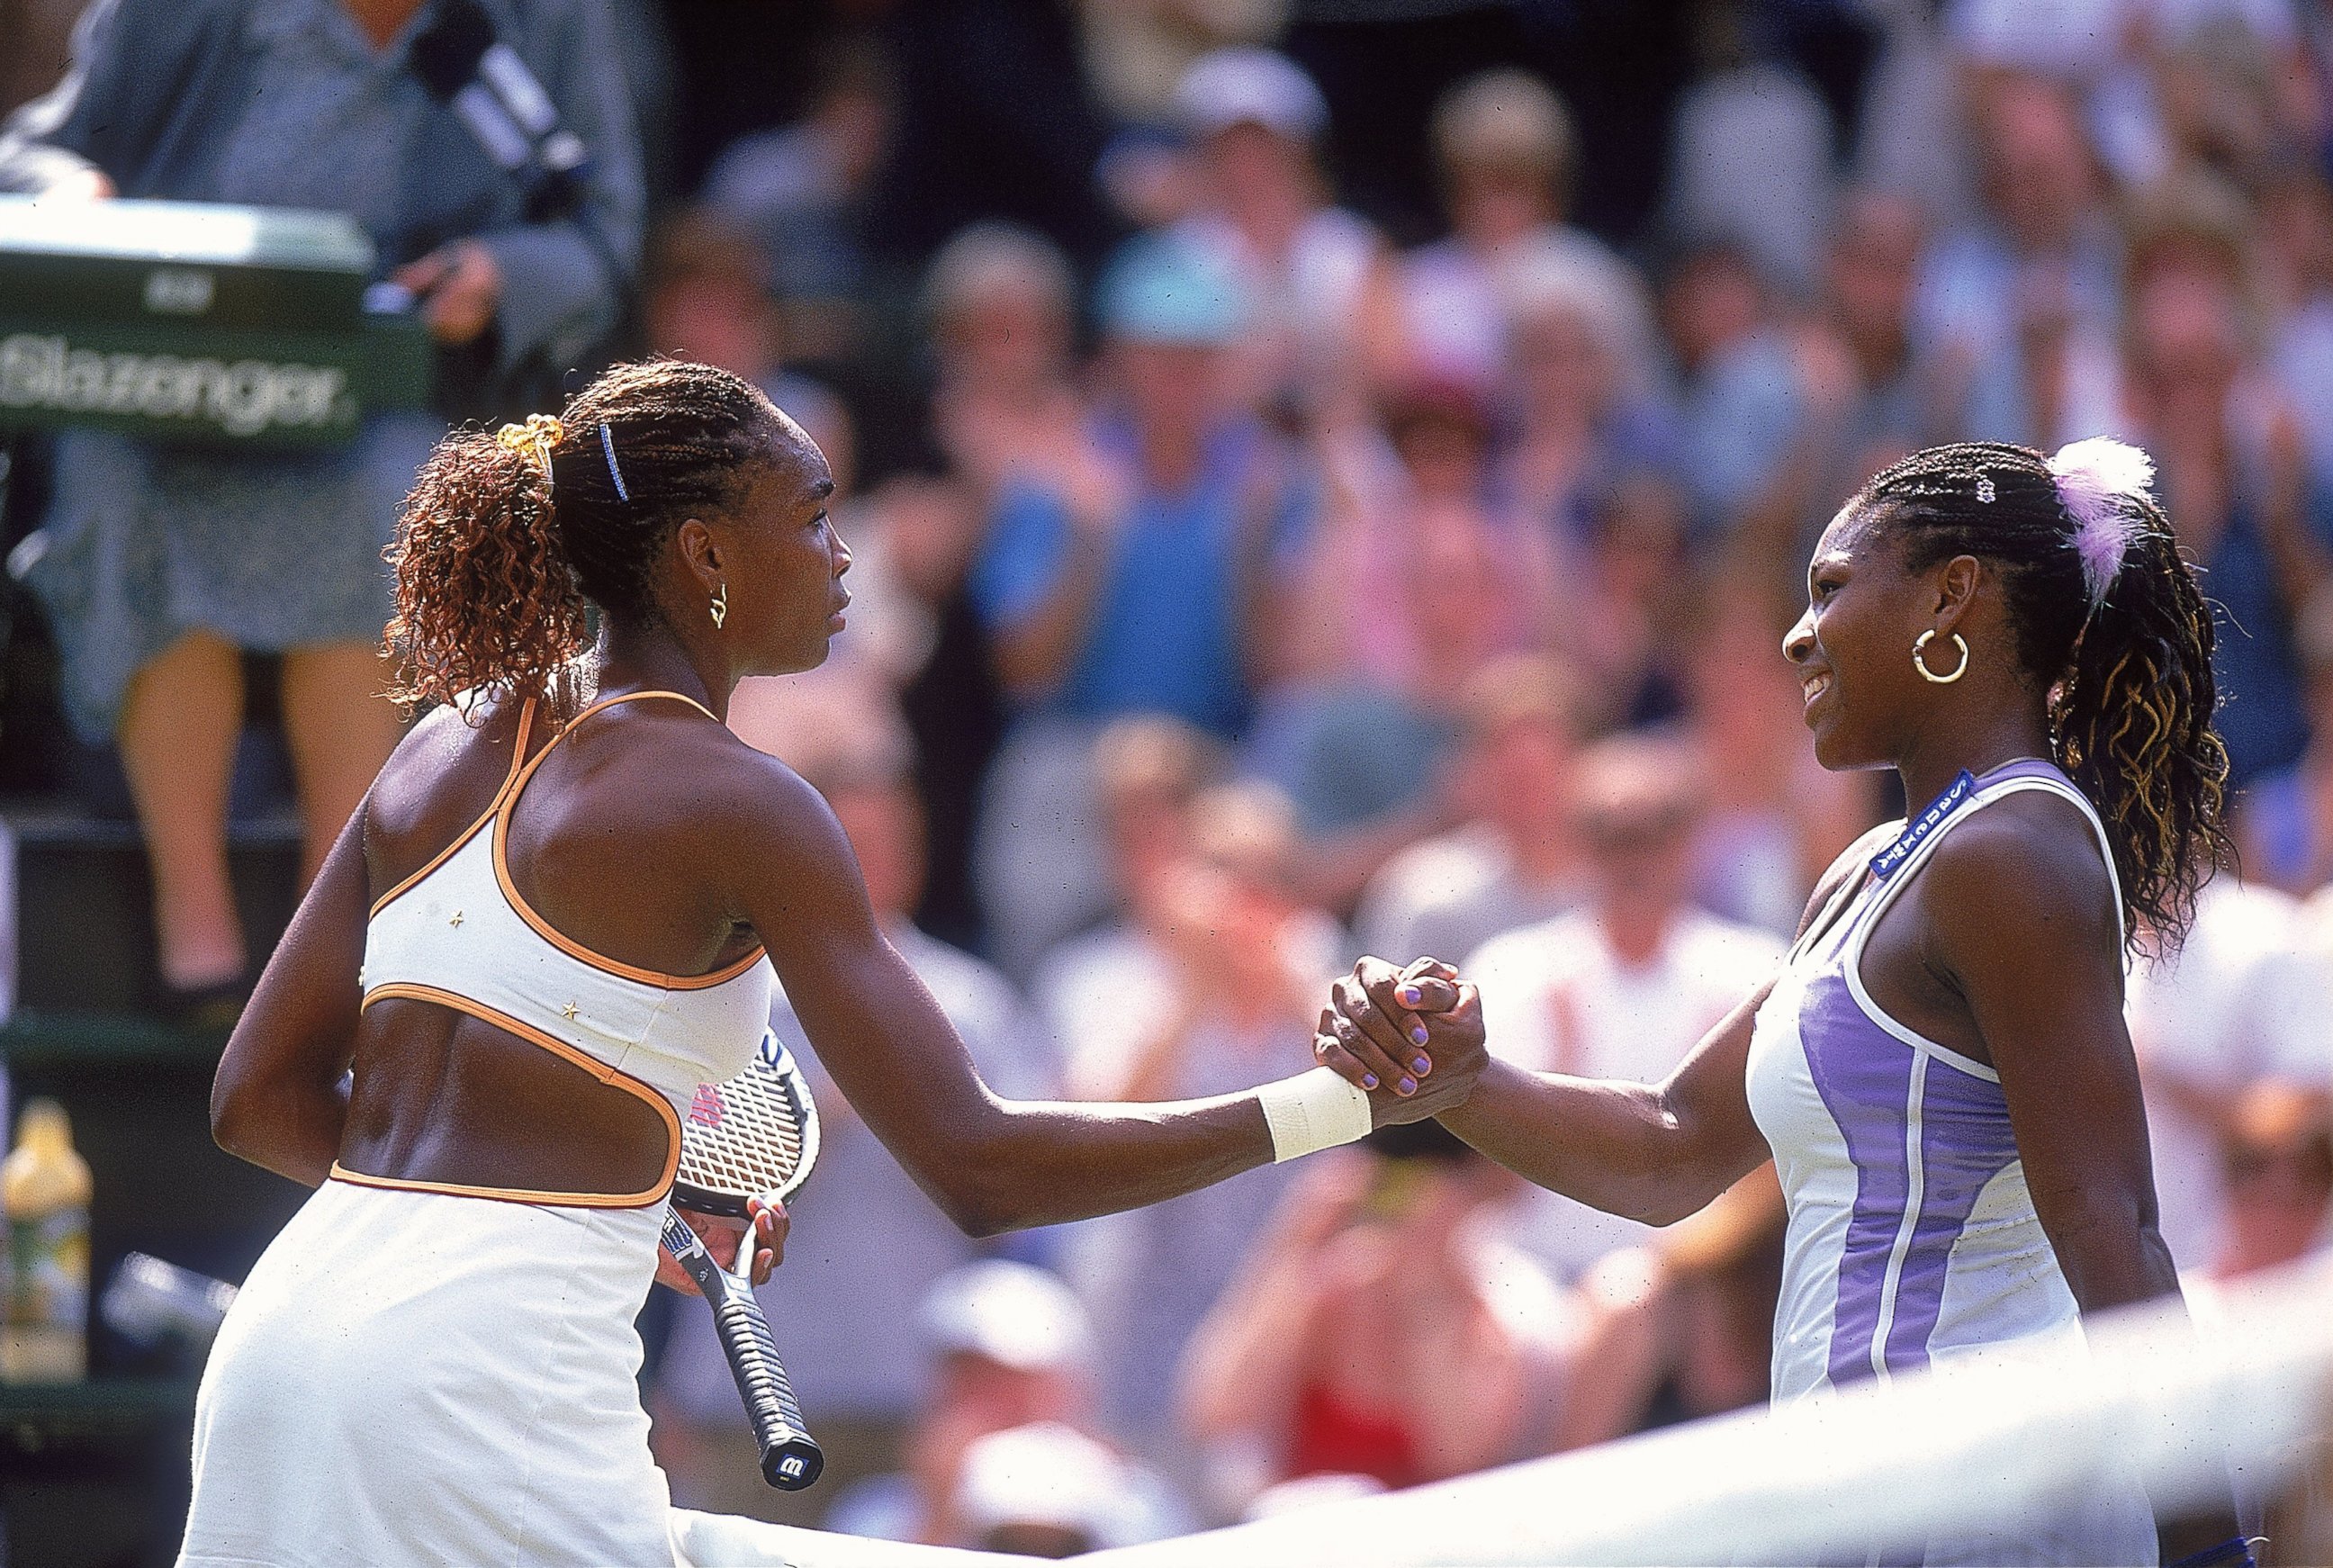 PHOTO: Venus Williams beat her younger sister Serena during the semi-final game at Wimbledon on July 6, 2000.